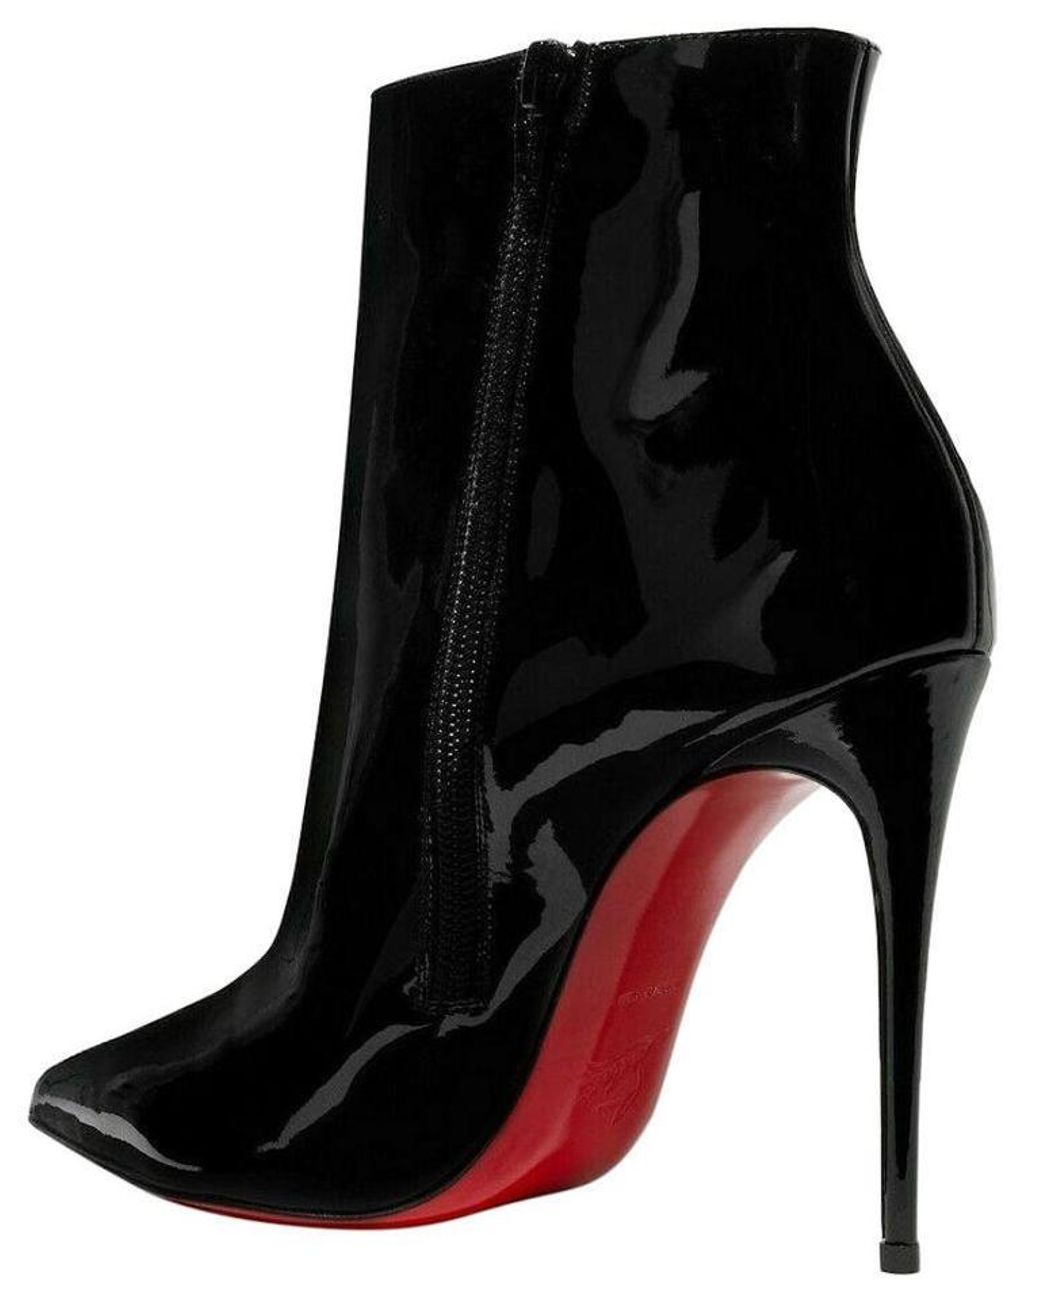 Christian Louboutin New So Kate 100 Patent Leather Boots/booties in ...